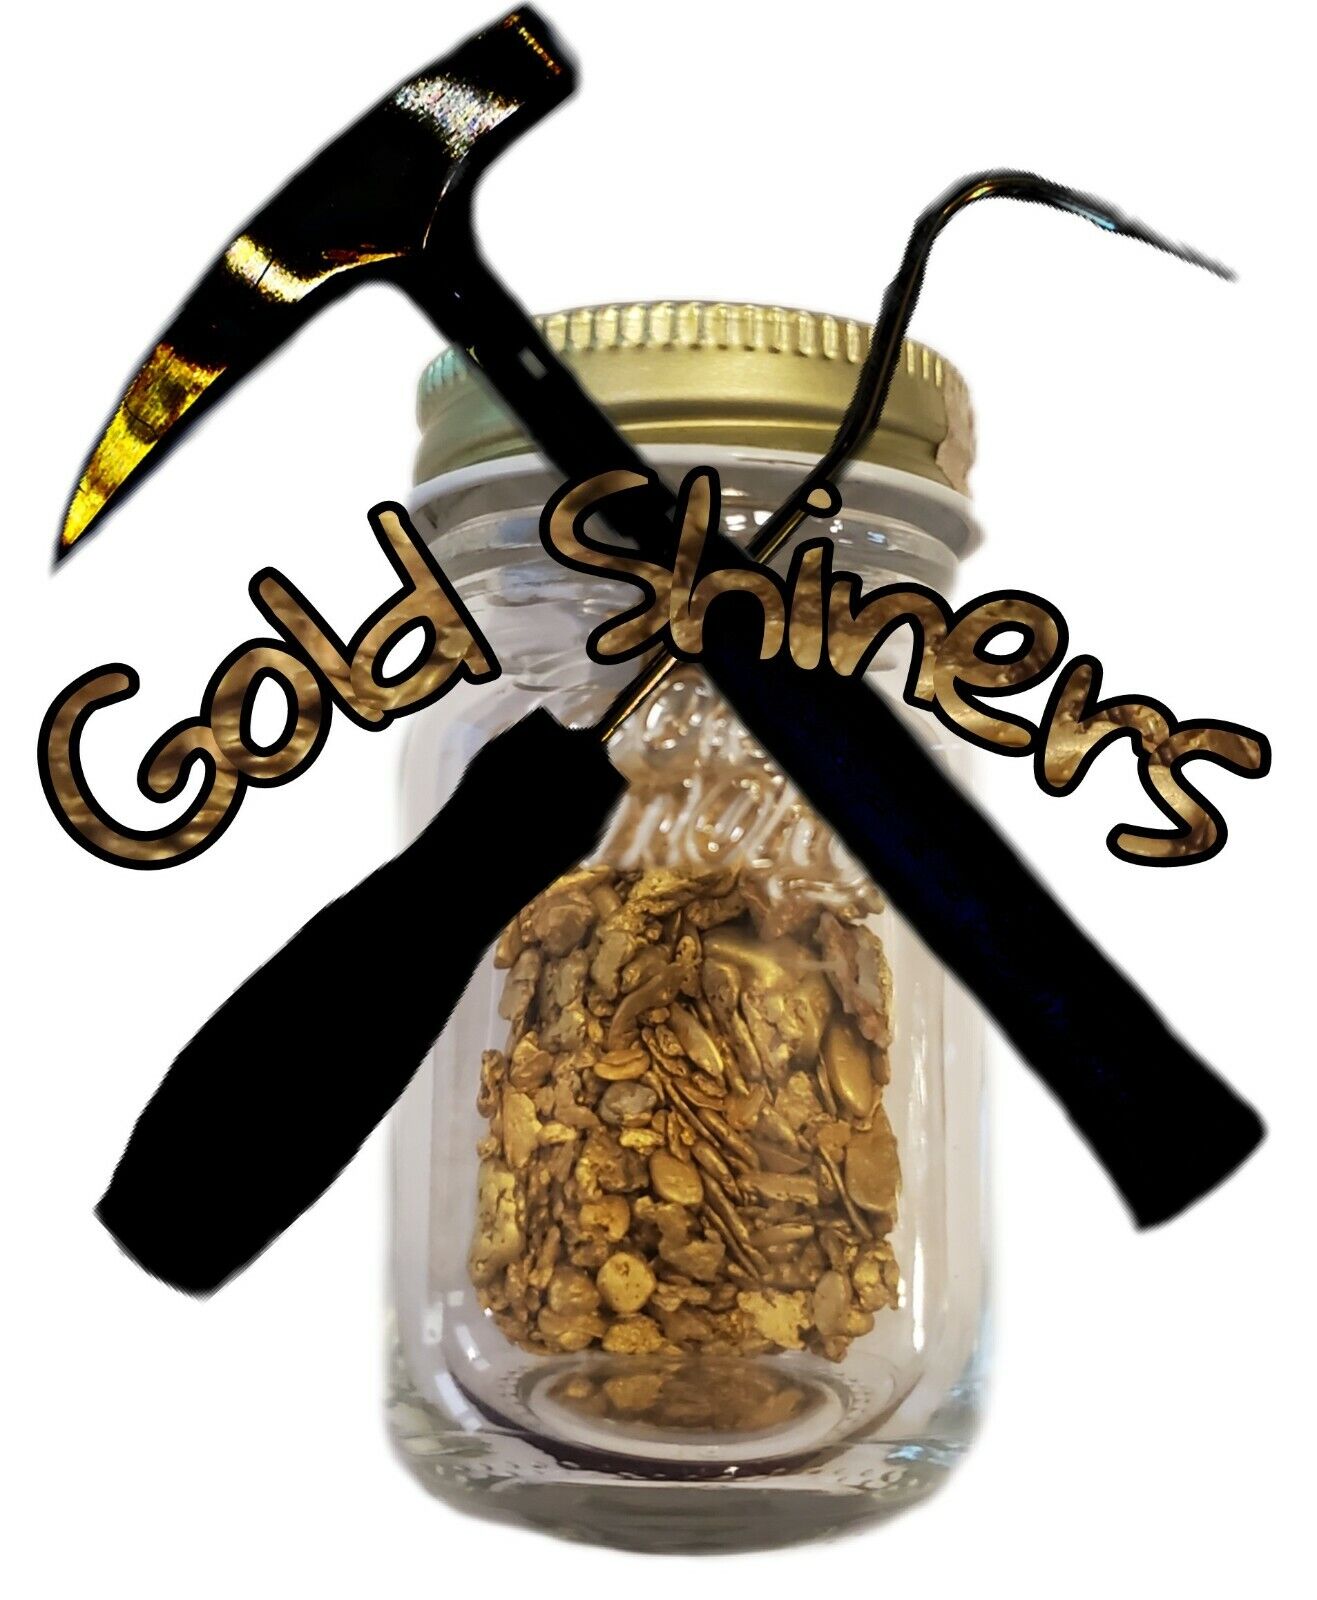 From Youtube\'s Gold Shiners 1/2 grams of Natural Placer Gold Nugget Pickers